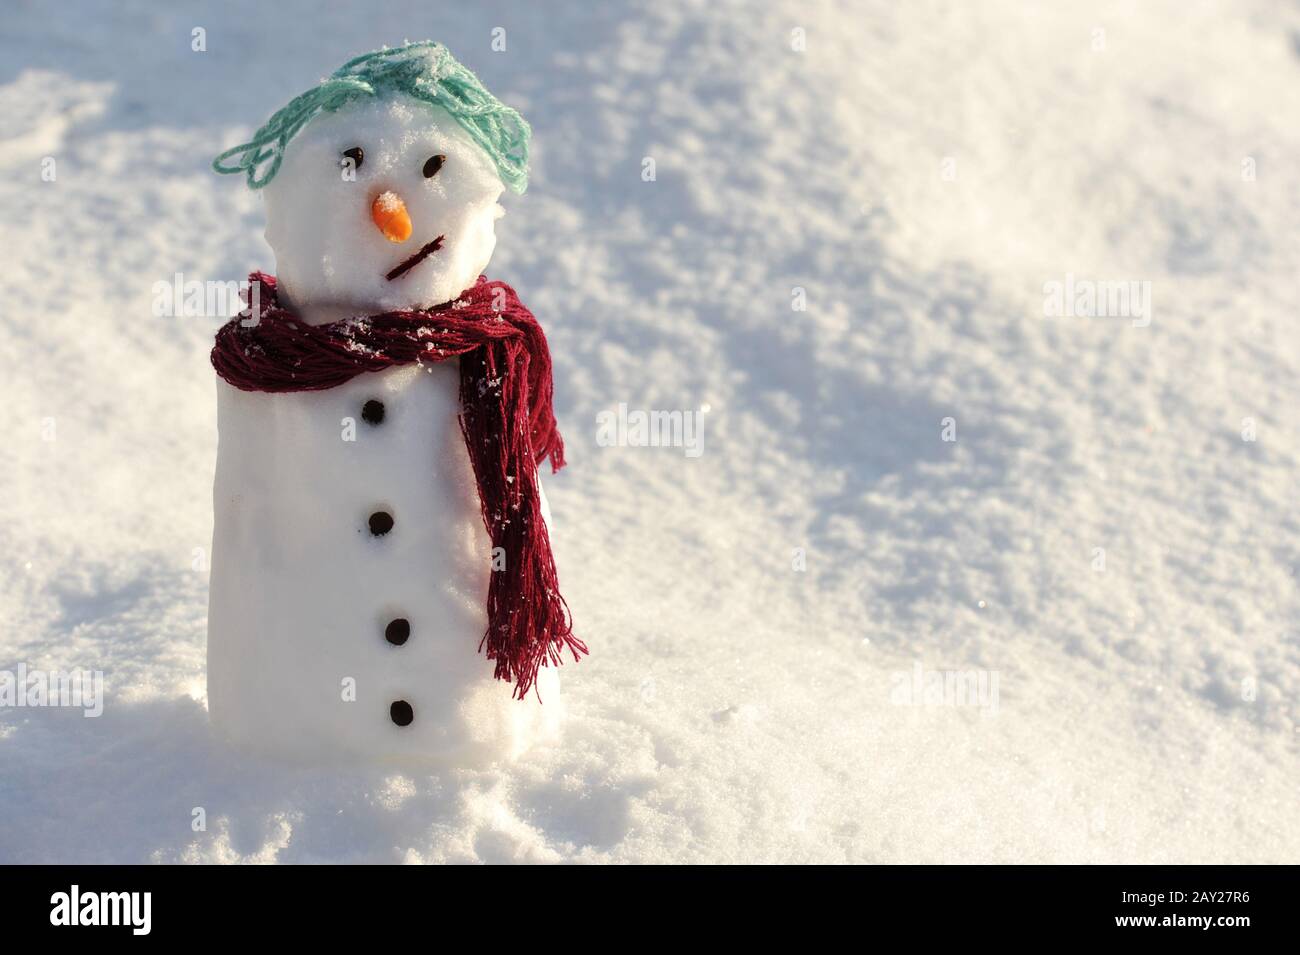 Snowman for winter christmas Stock Photo